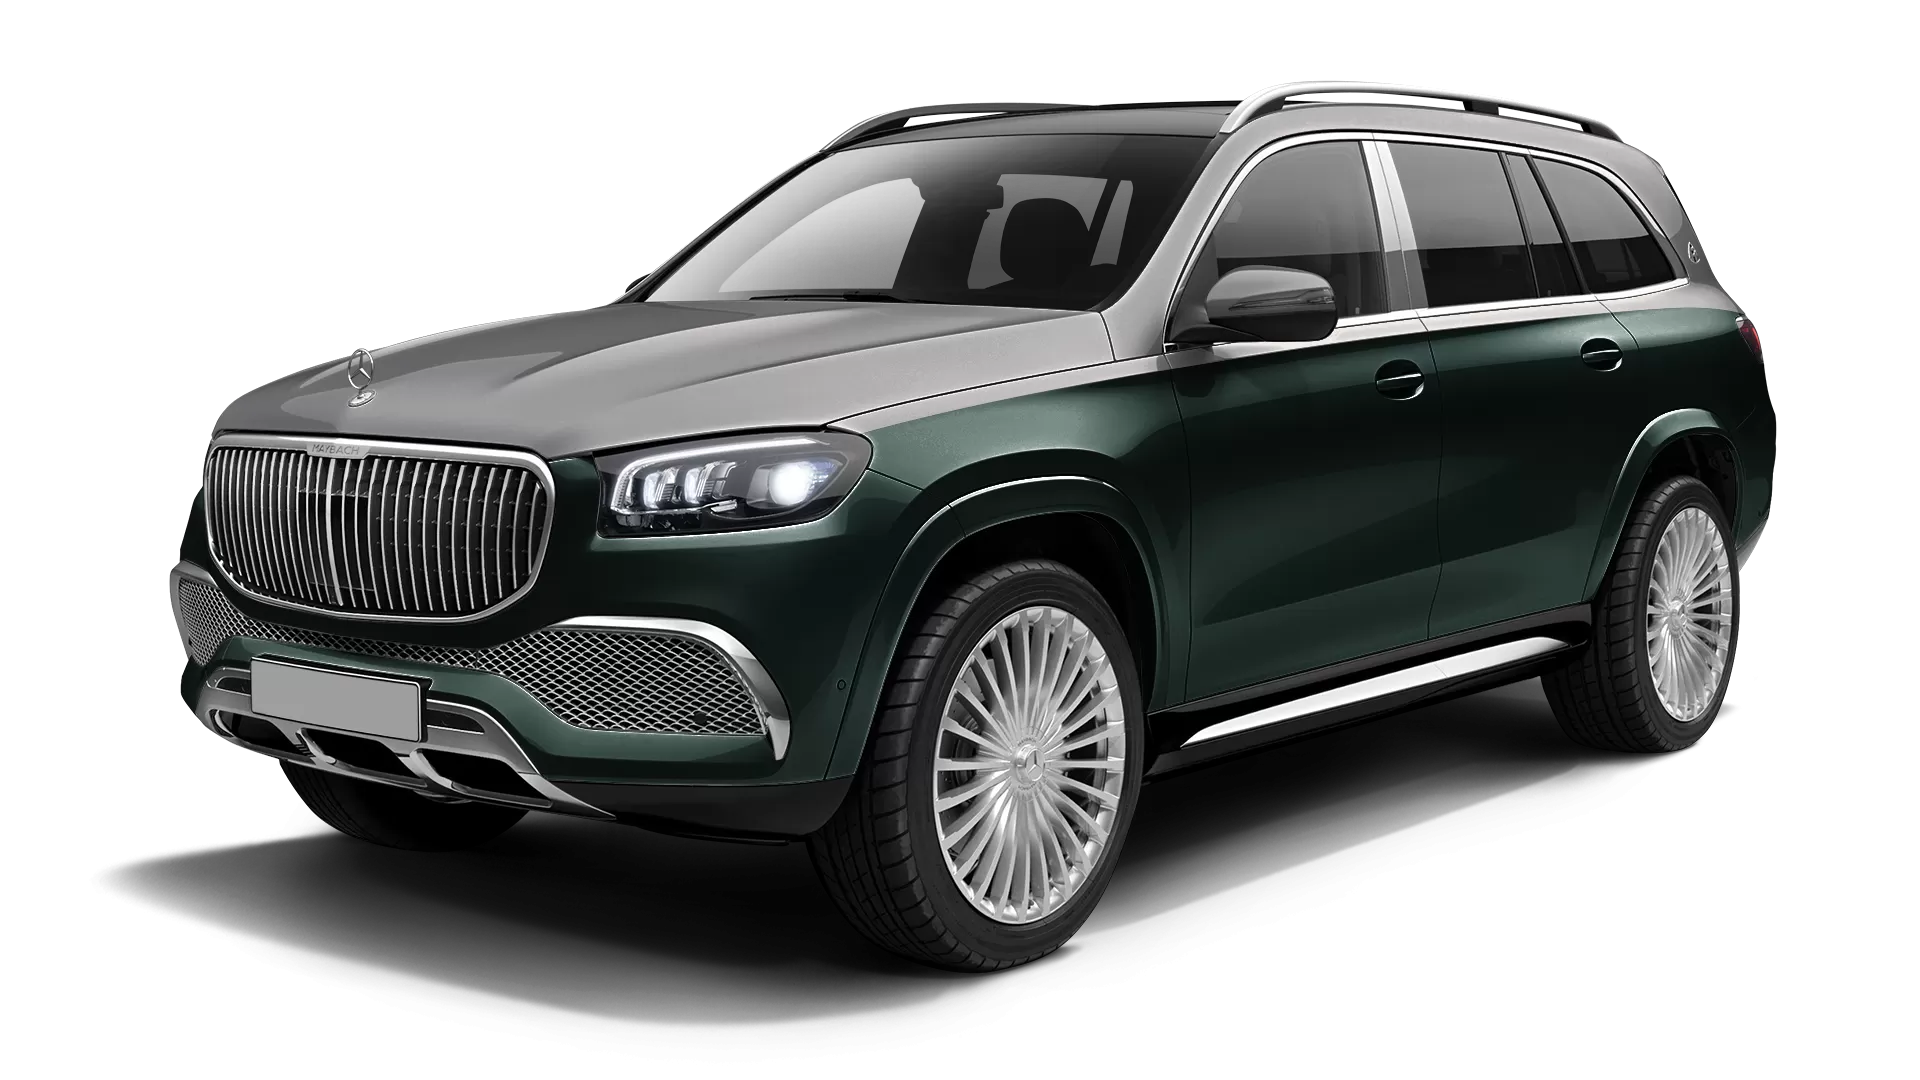 Mercedes Maybach GLS 600 stock front view in Emerald Green & Mojave Silver color